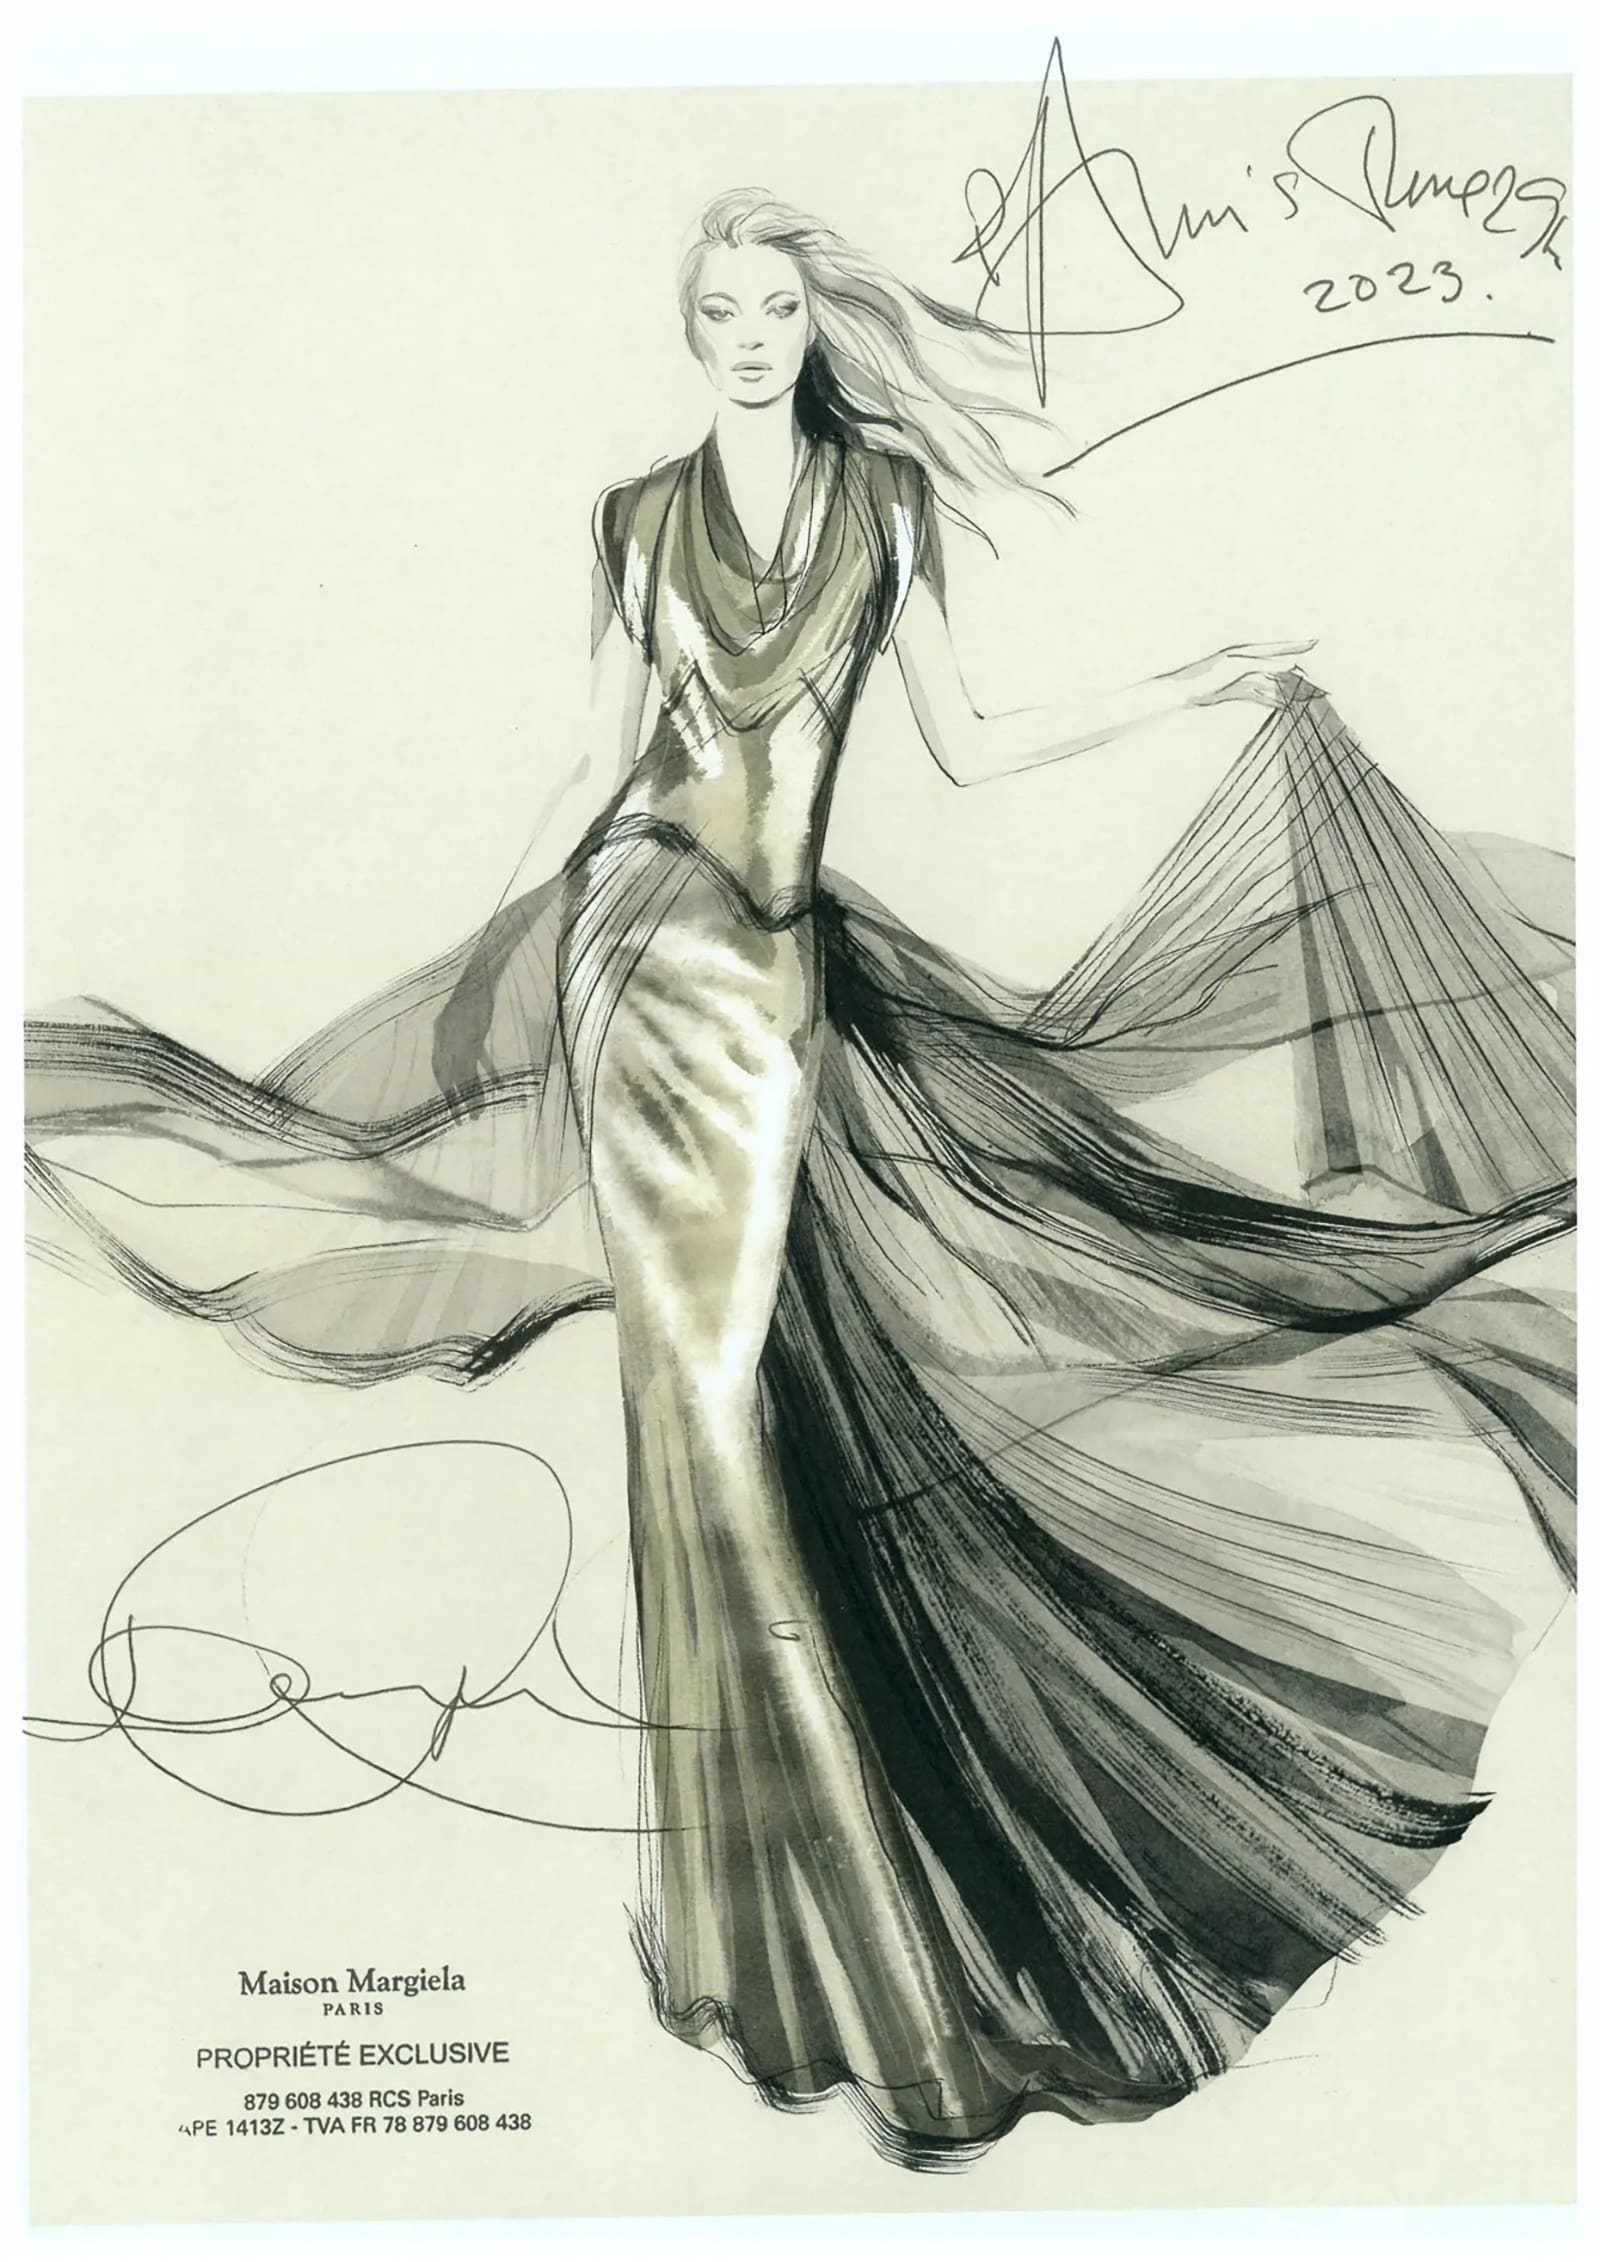 A sketch of Kate Moss’s custom John Galliano dress for Vogue World: London, made from ’30s lamé and tulle. Courtesy of Maison Margiela